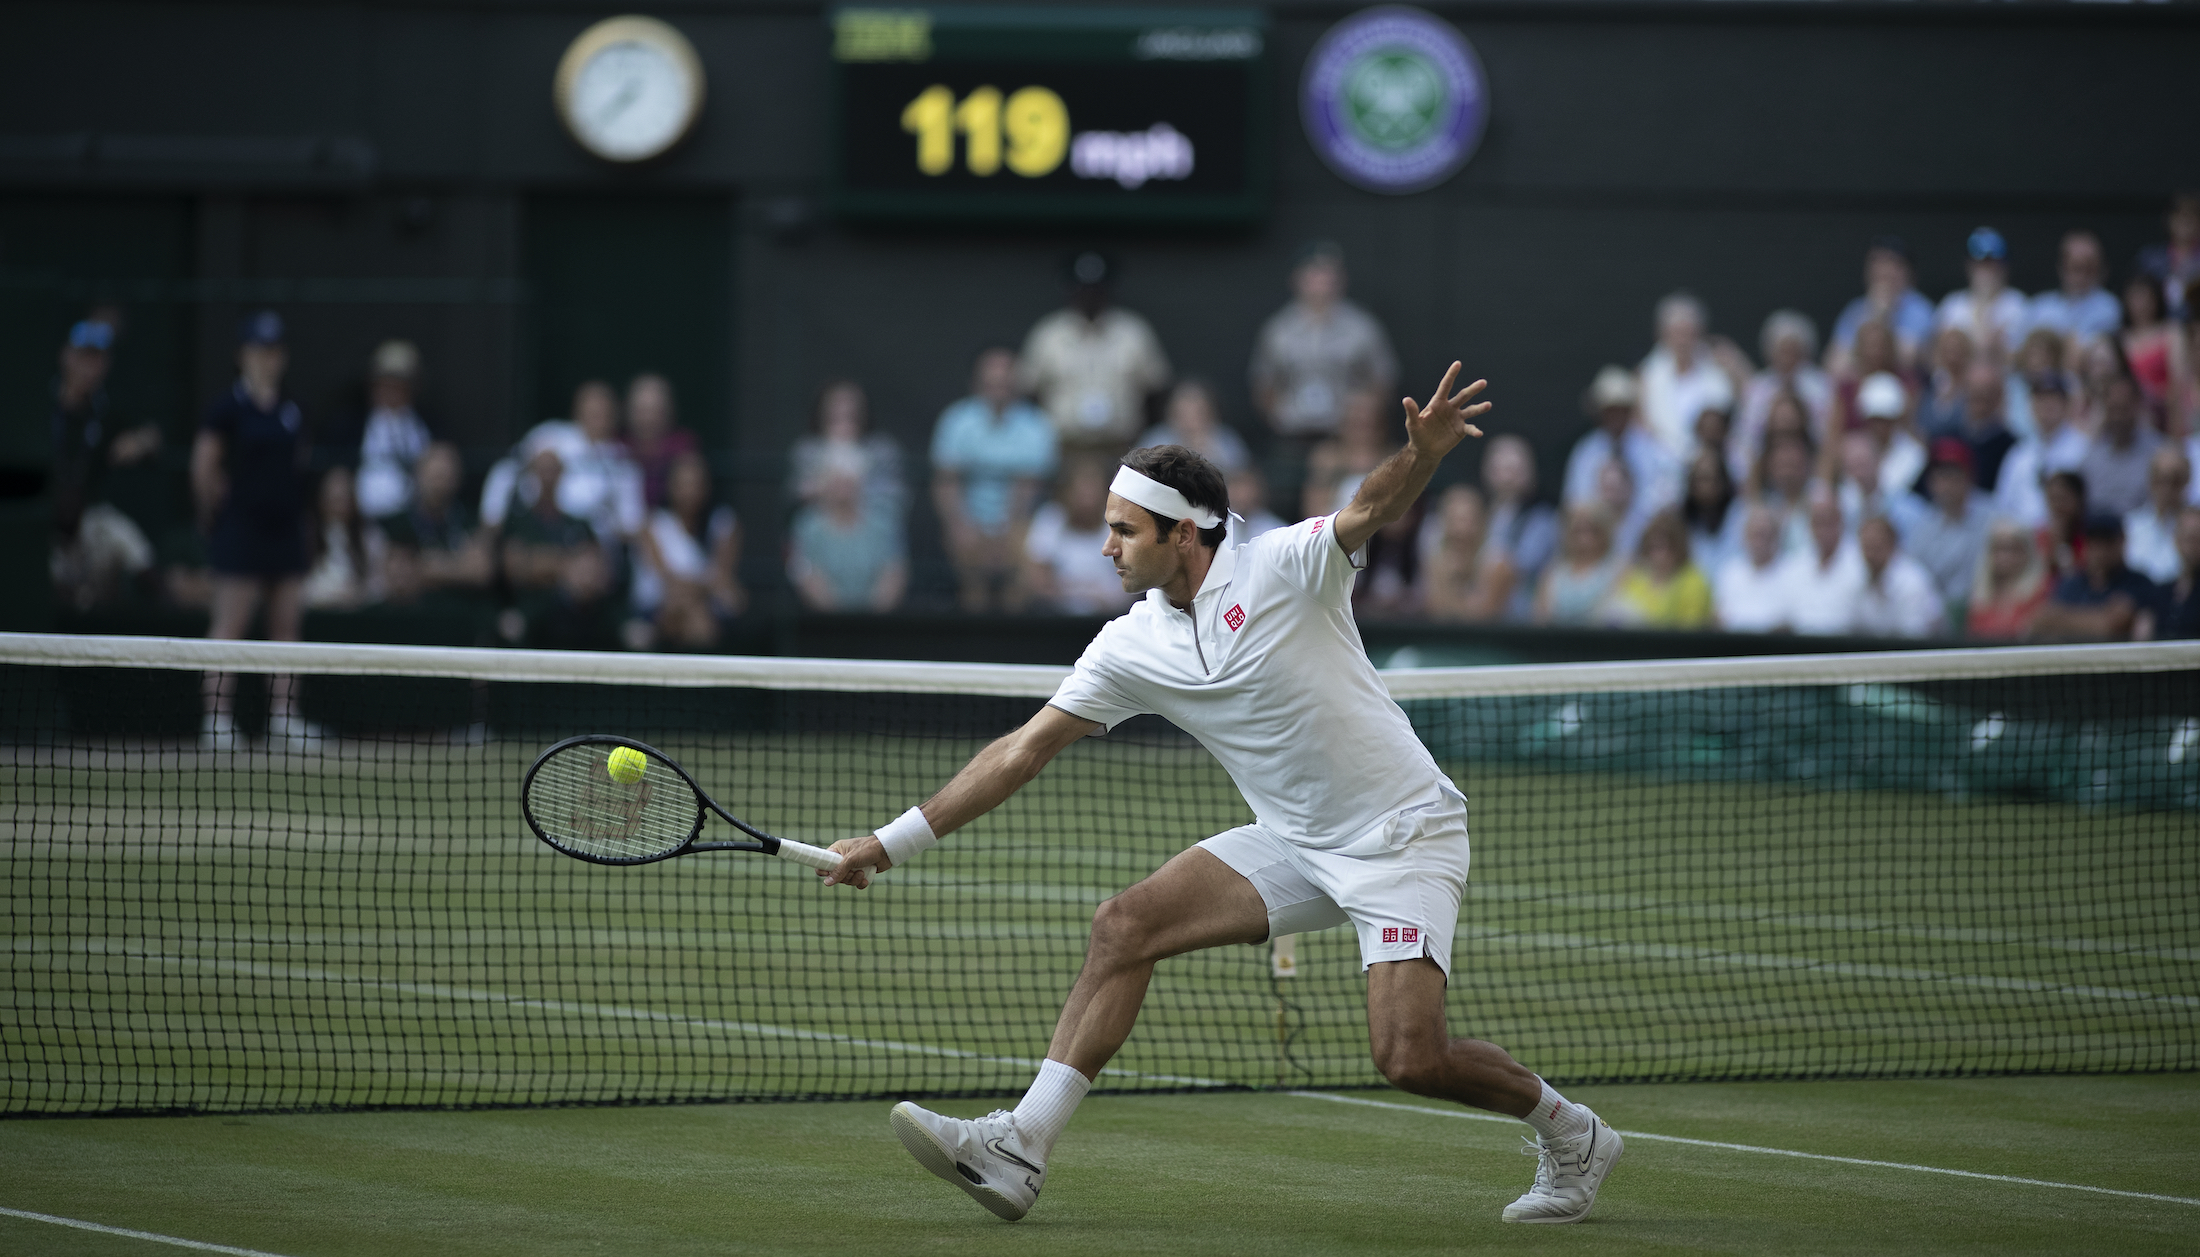 A general view of Roger Federer of Switzerland playing a volley at the net during his match against Rafael Nadal of Spain during the Men's Singles Semifinals on Centre Court during the Wimbledon Lawn Tennis Championships at the All England Lawn Tennis and Croquet Club at Wimbledon on July 12, 2019 in London.